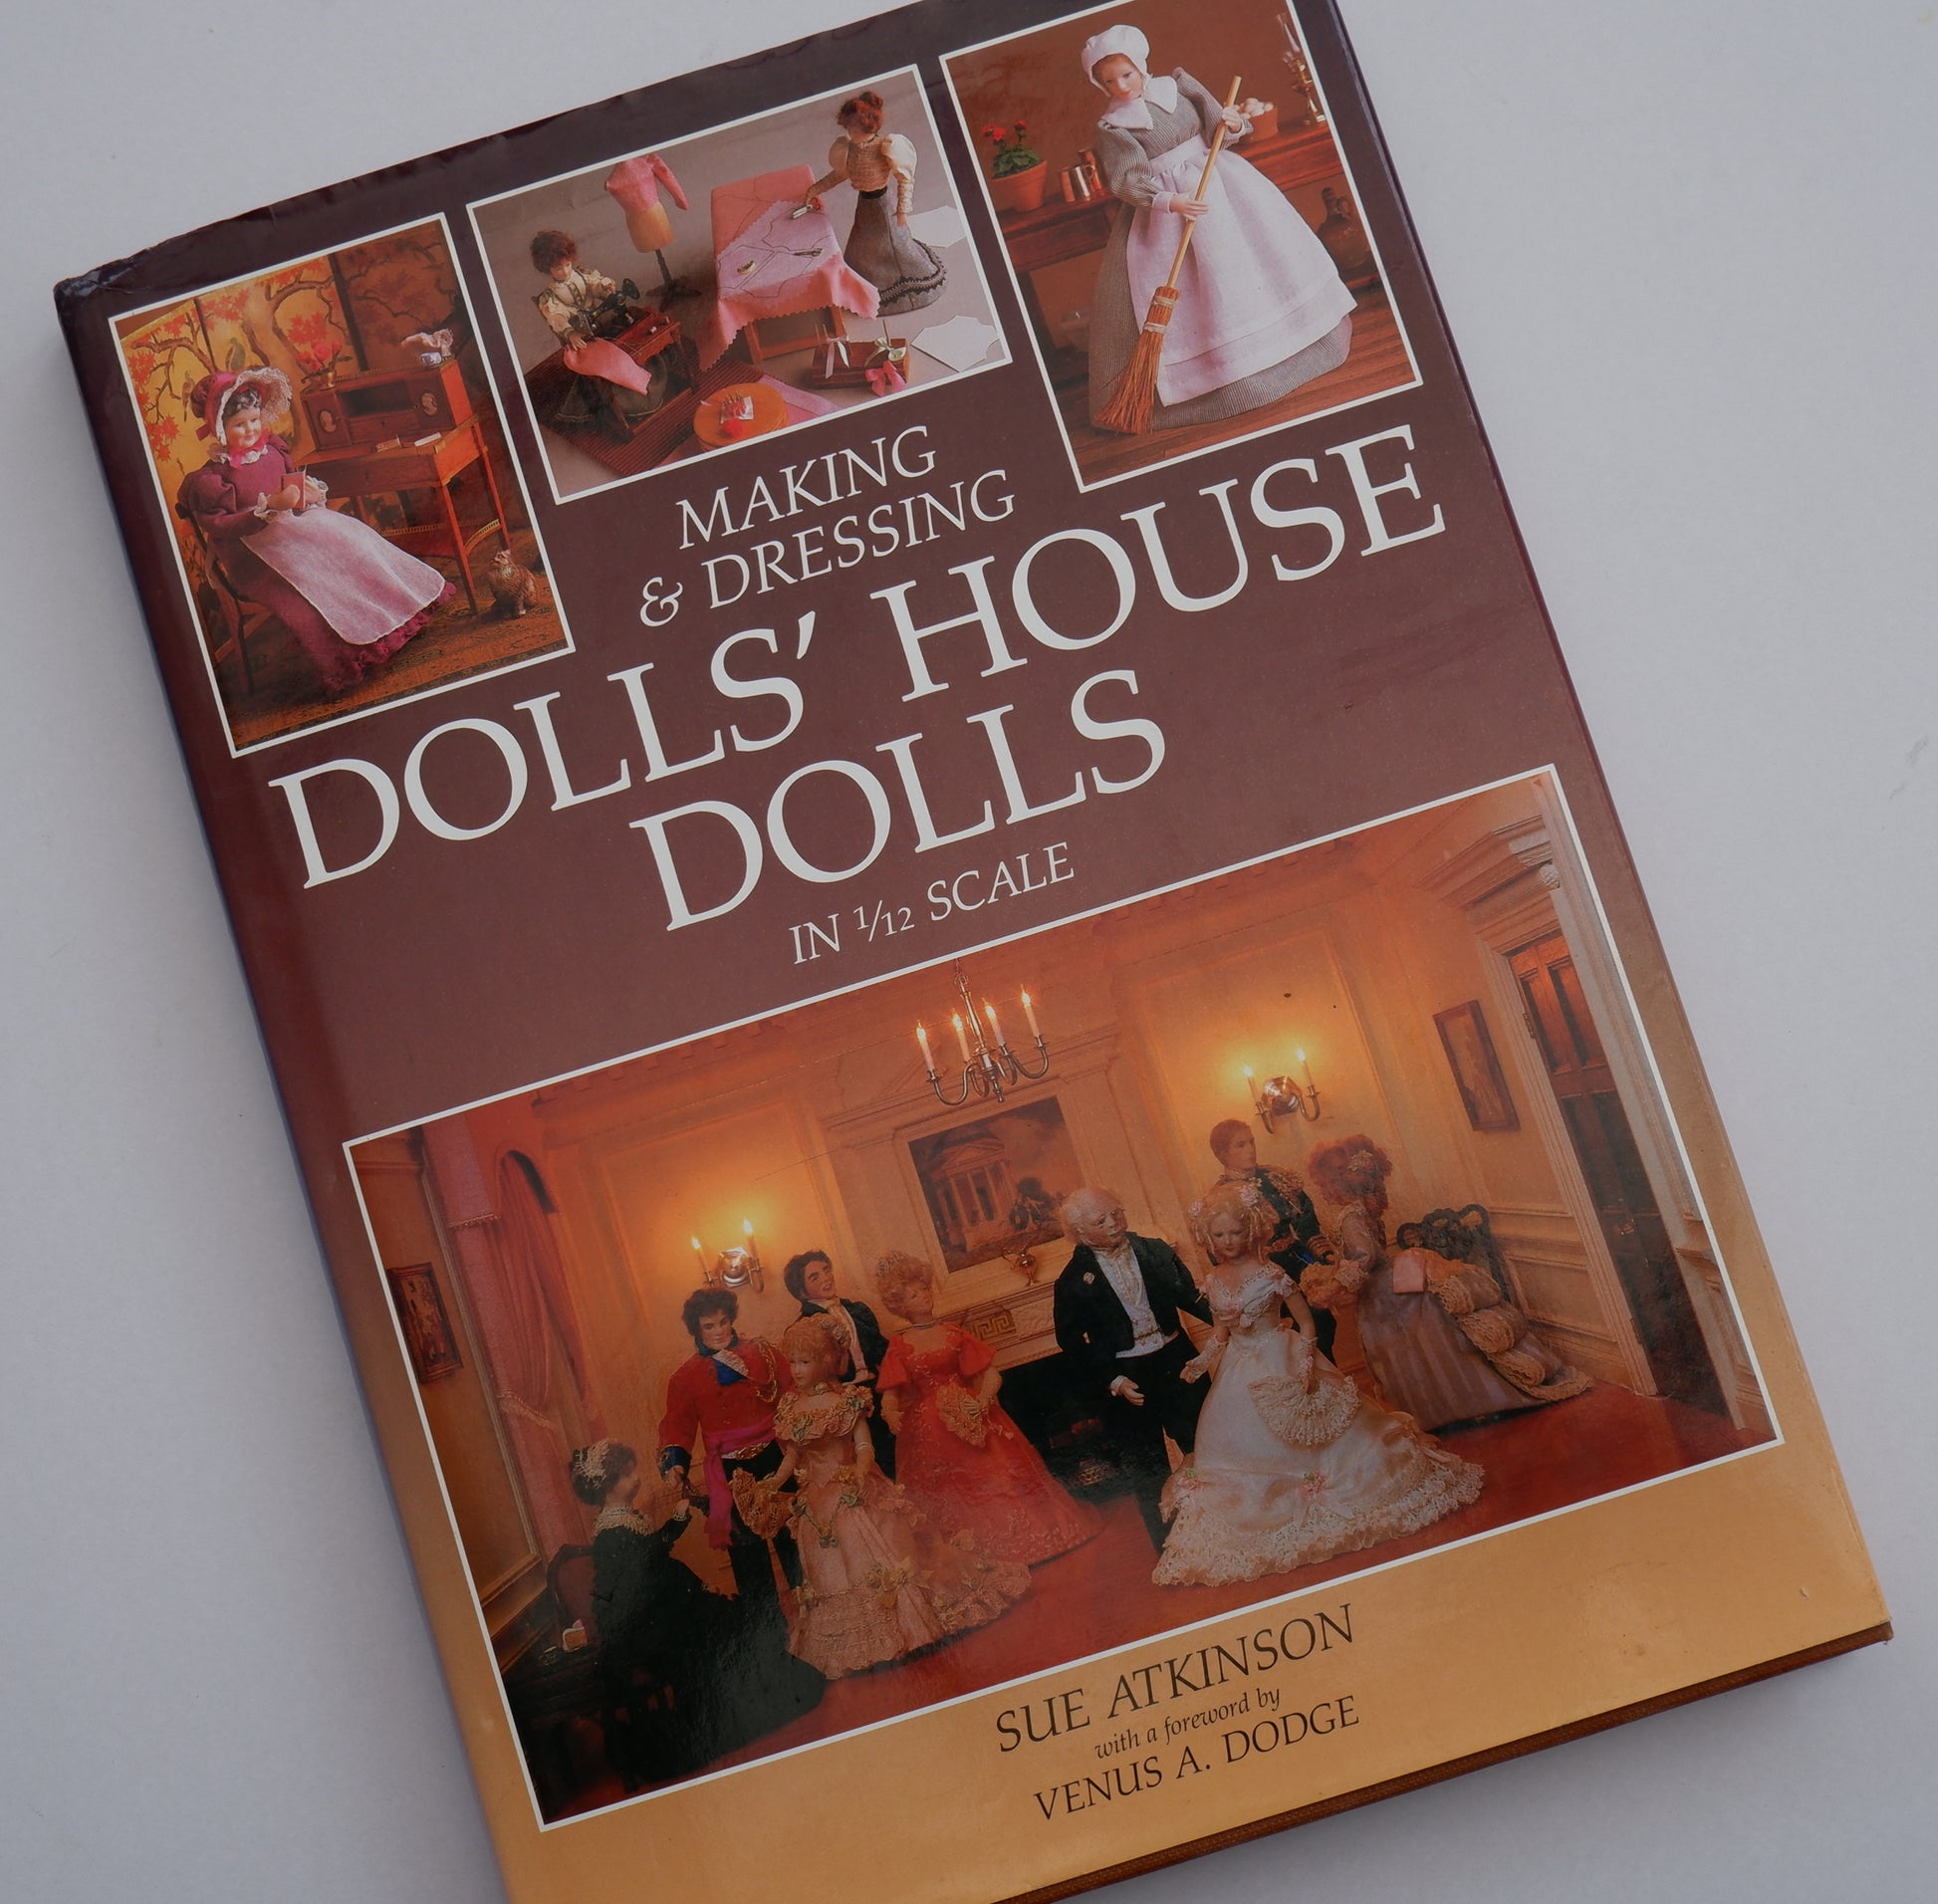 Making & Dressing Dolls' House Dolls : " In 1/12 Scale - by Sue Atkinson (Author)